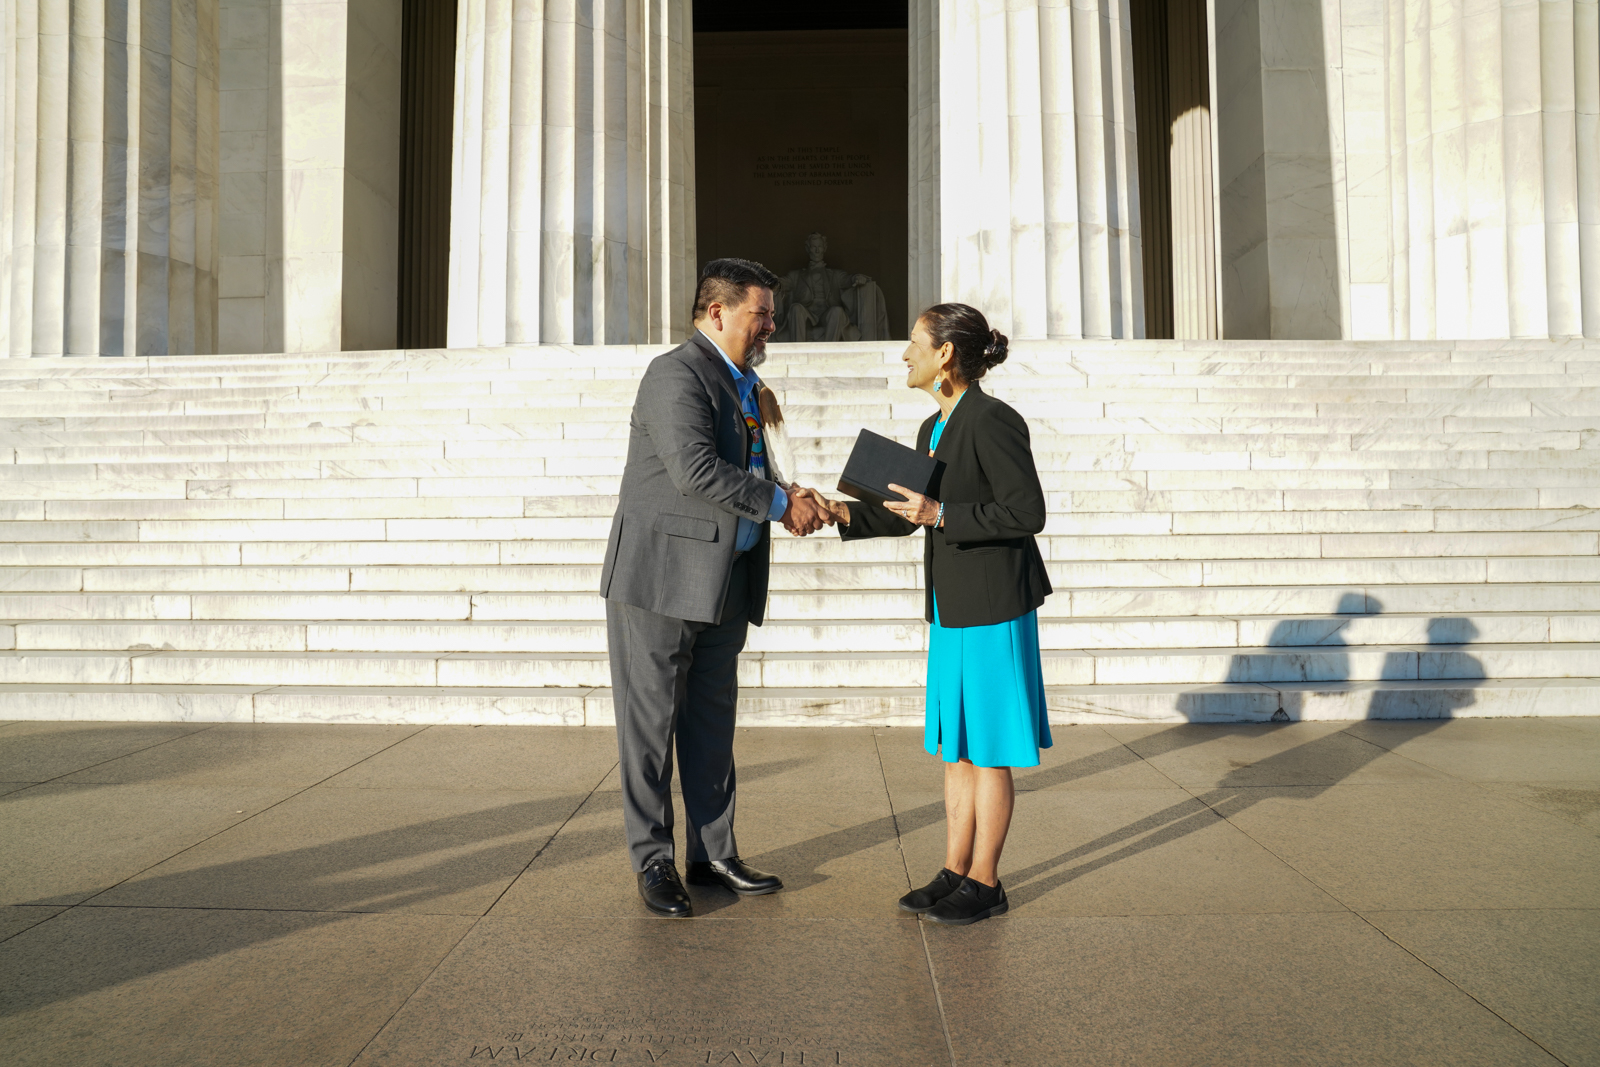 Sunlight colors the Lincoln Memorial steps light yellow. Charles Sams stands on the left in a dark gray suit and blue shirt, a beaded medallion hanging from a necklace on his chest and an eagle feather in his hair. Deb Haaland stands on the right in a turquoise dress, black blazer and turquoise jewelry. Each is smiling as they shake hands, Haaland holding a black book in her left hand. The Abraham Lincoln statue is covered in shadow and visible in the background.